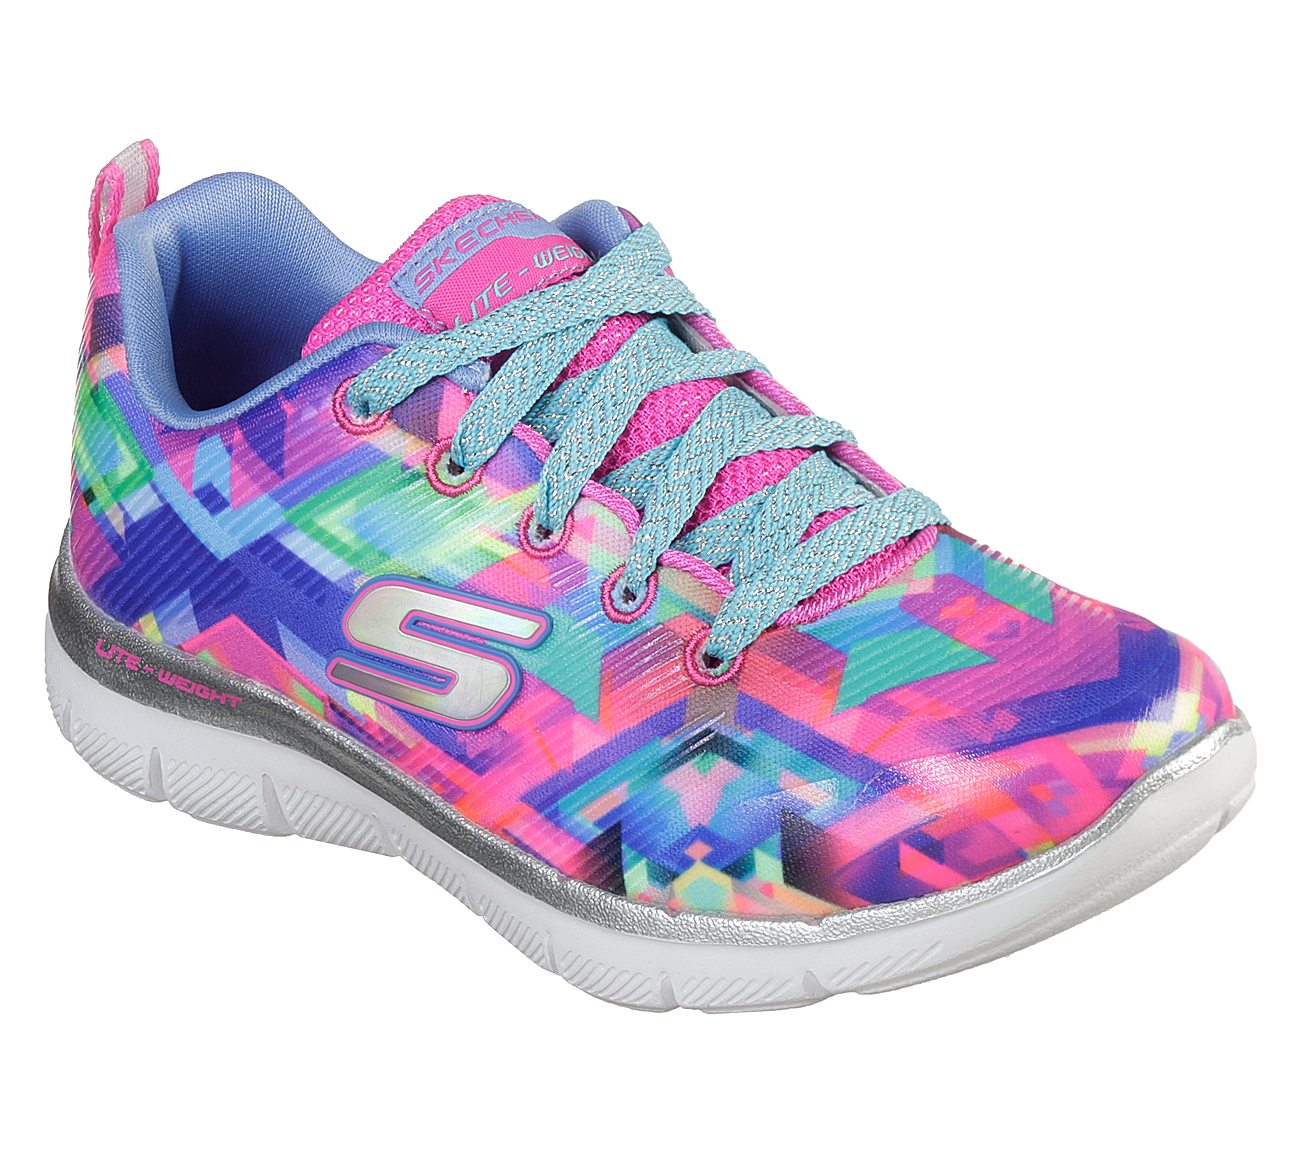 skechers colorful shoes